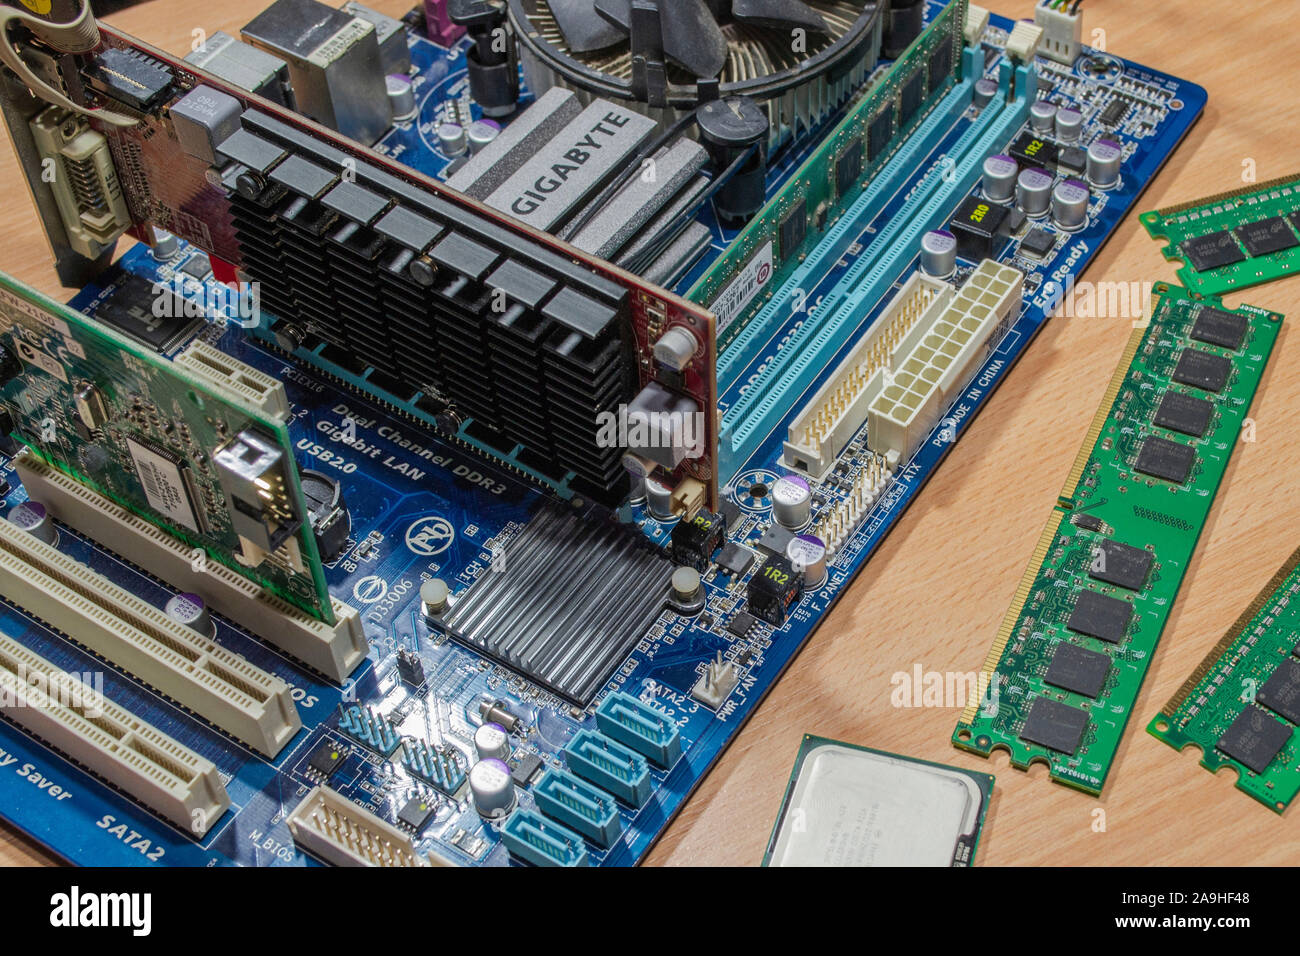 Gigabyte motherboard with Graphics card, RAM and processor Stock Photo -  Alamy